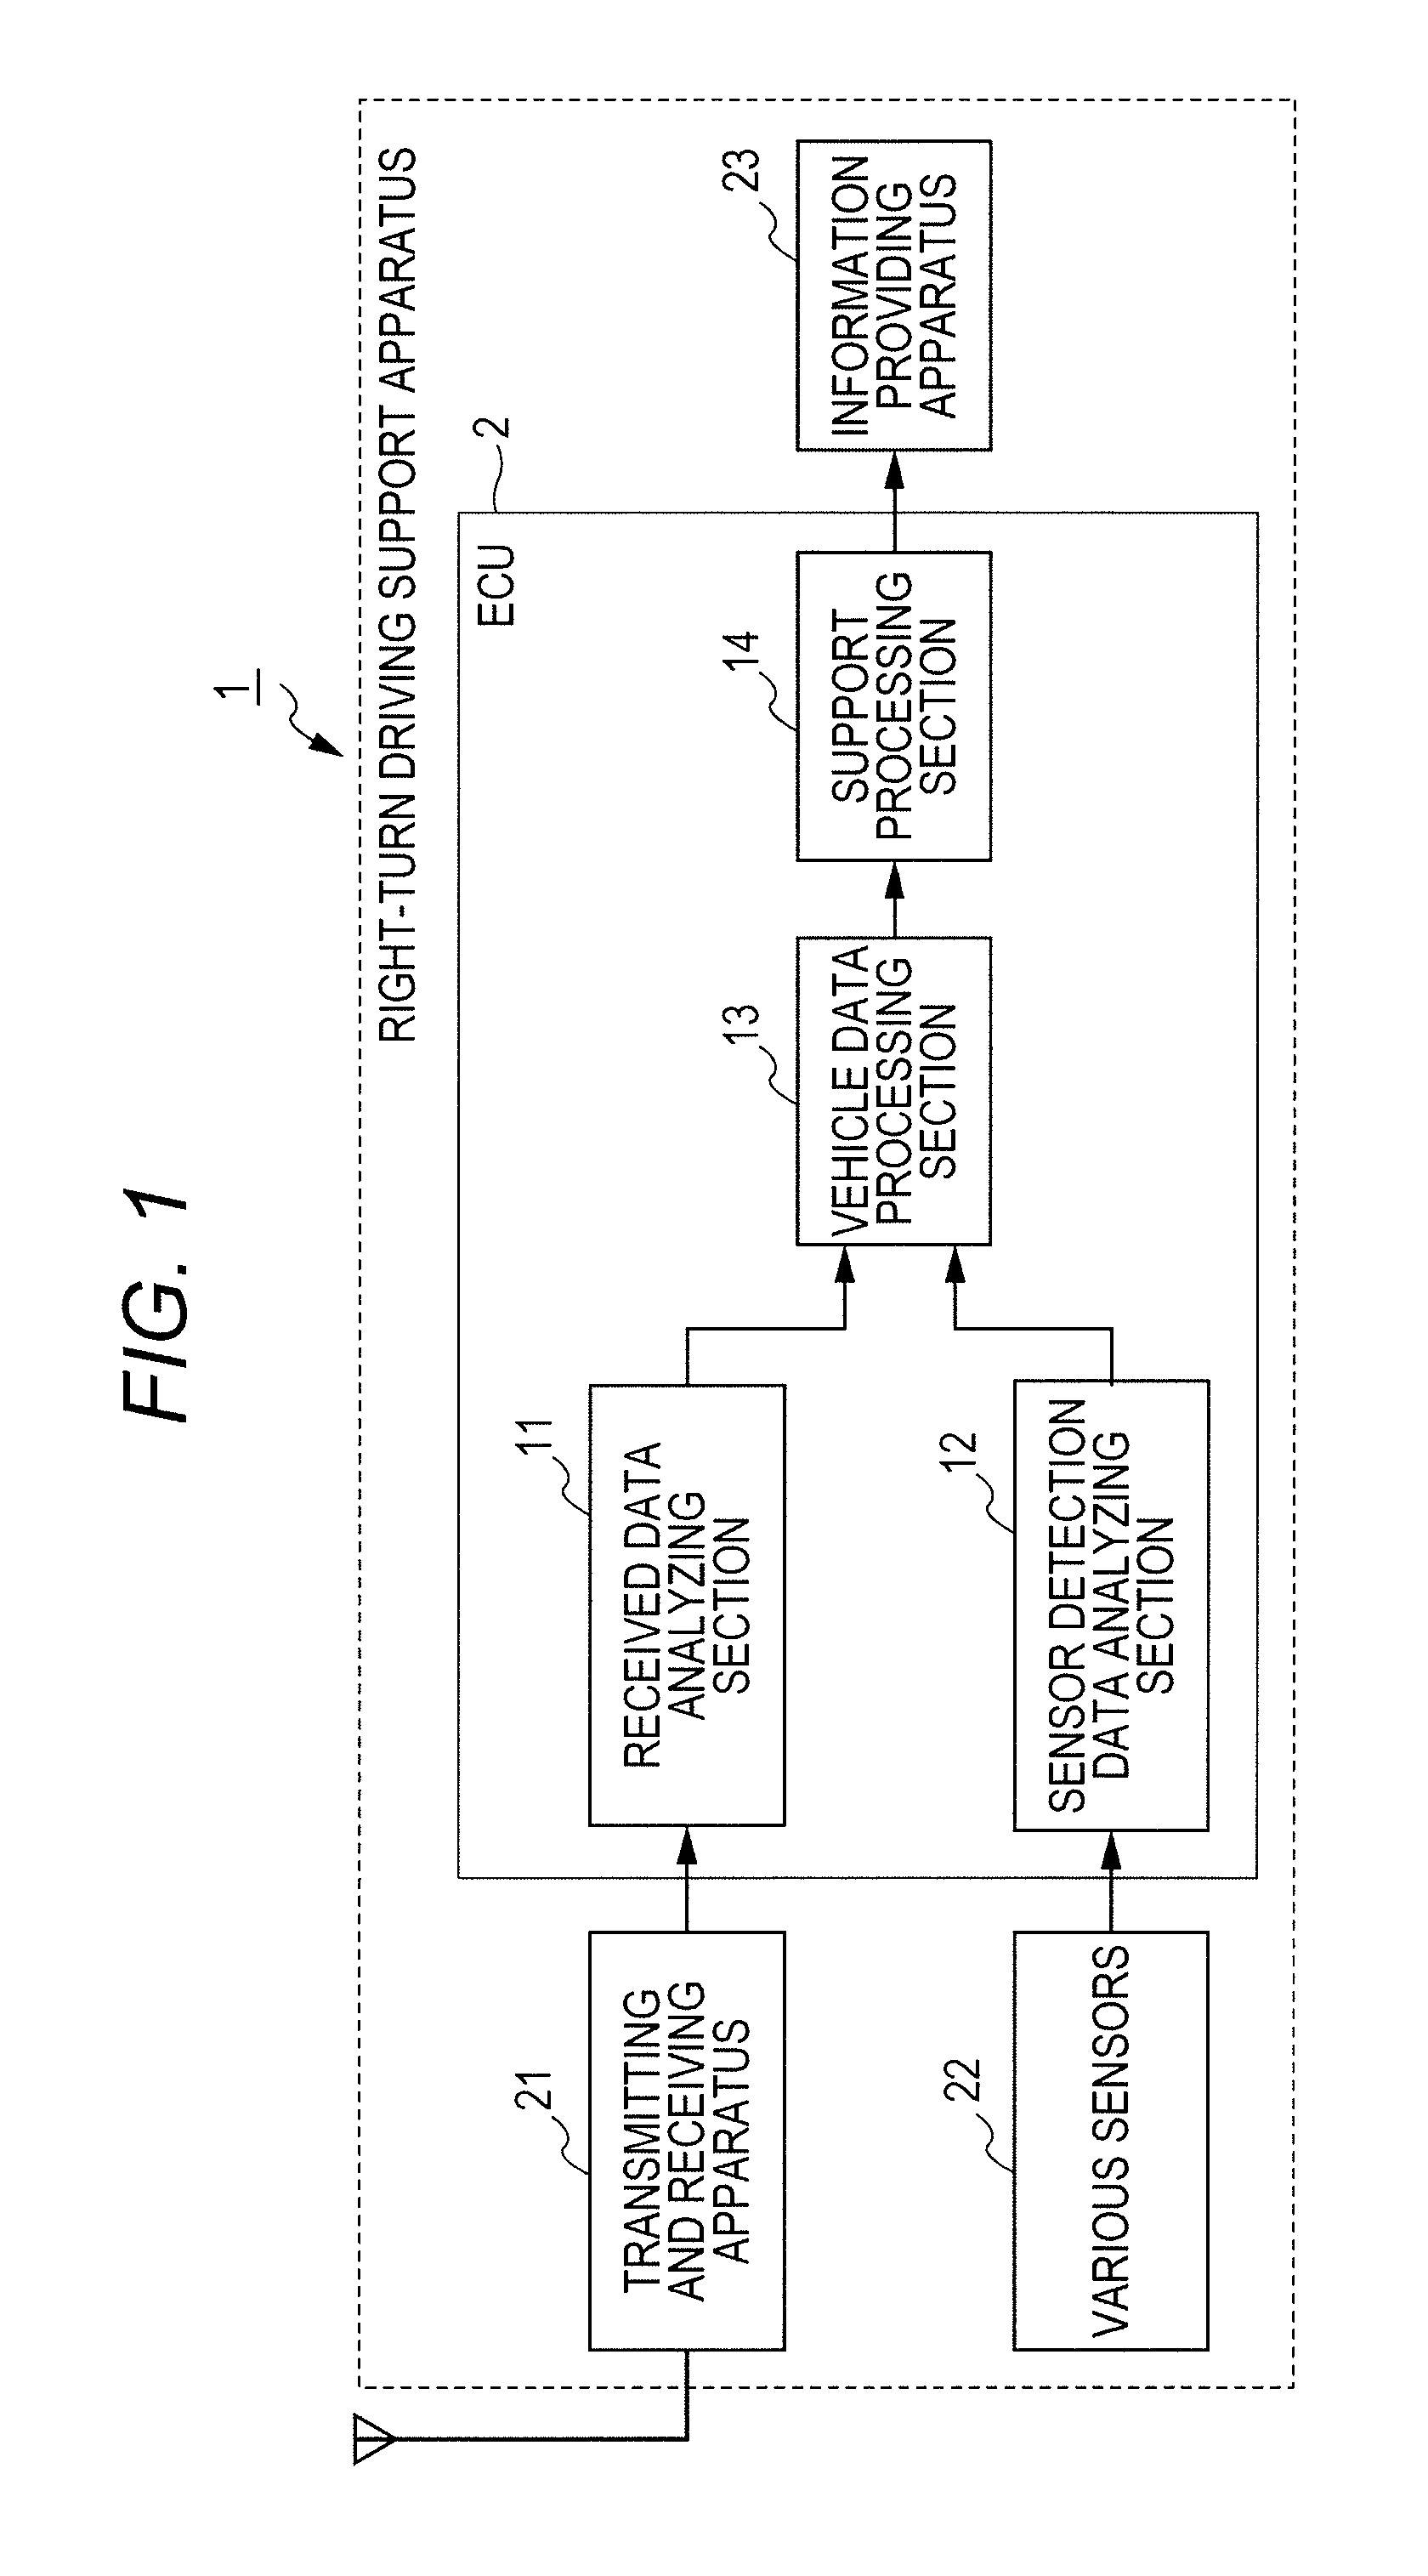 Driving support apparatus